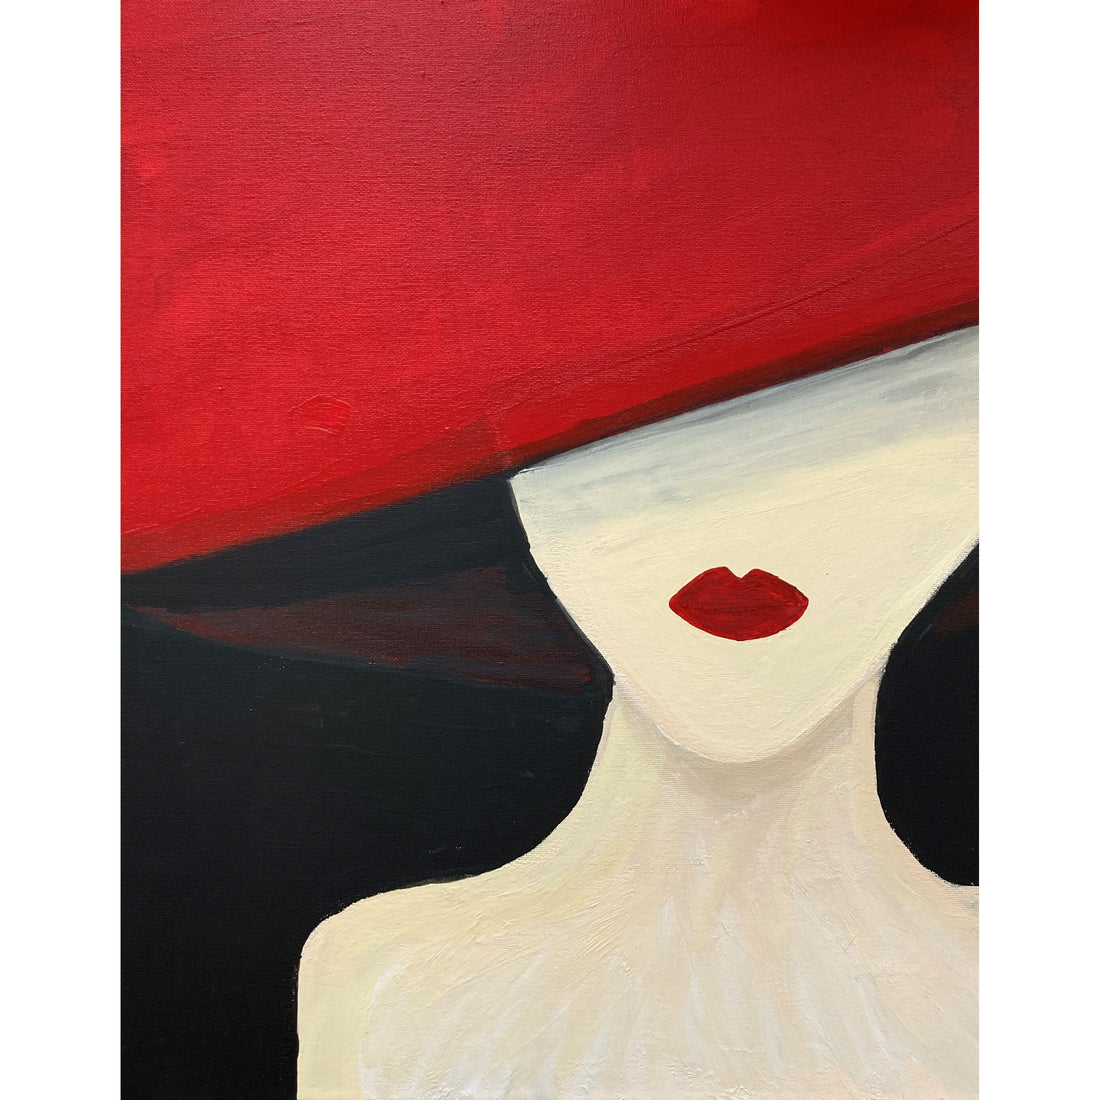 Acrylic Paint on Stretched Canvas, 20 x 16 Original Fine Art, Lady in the Red Hat by Hailey Swank WR-1860